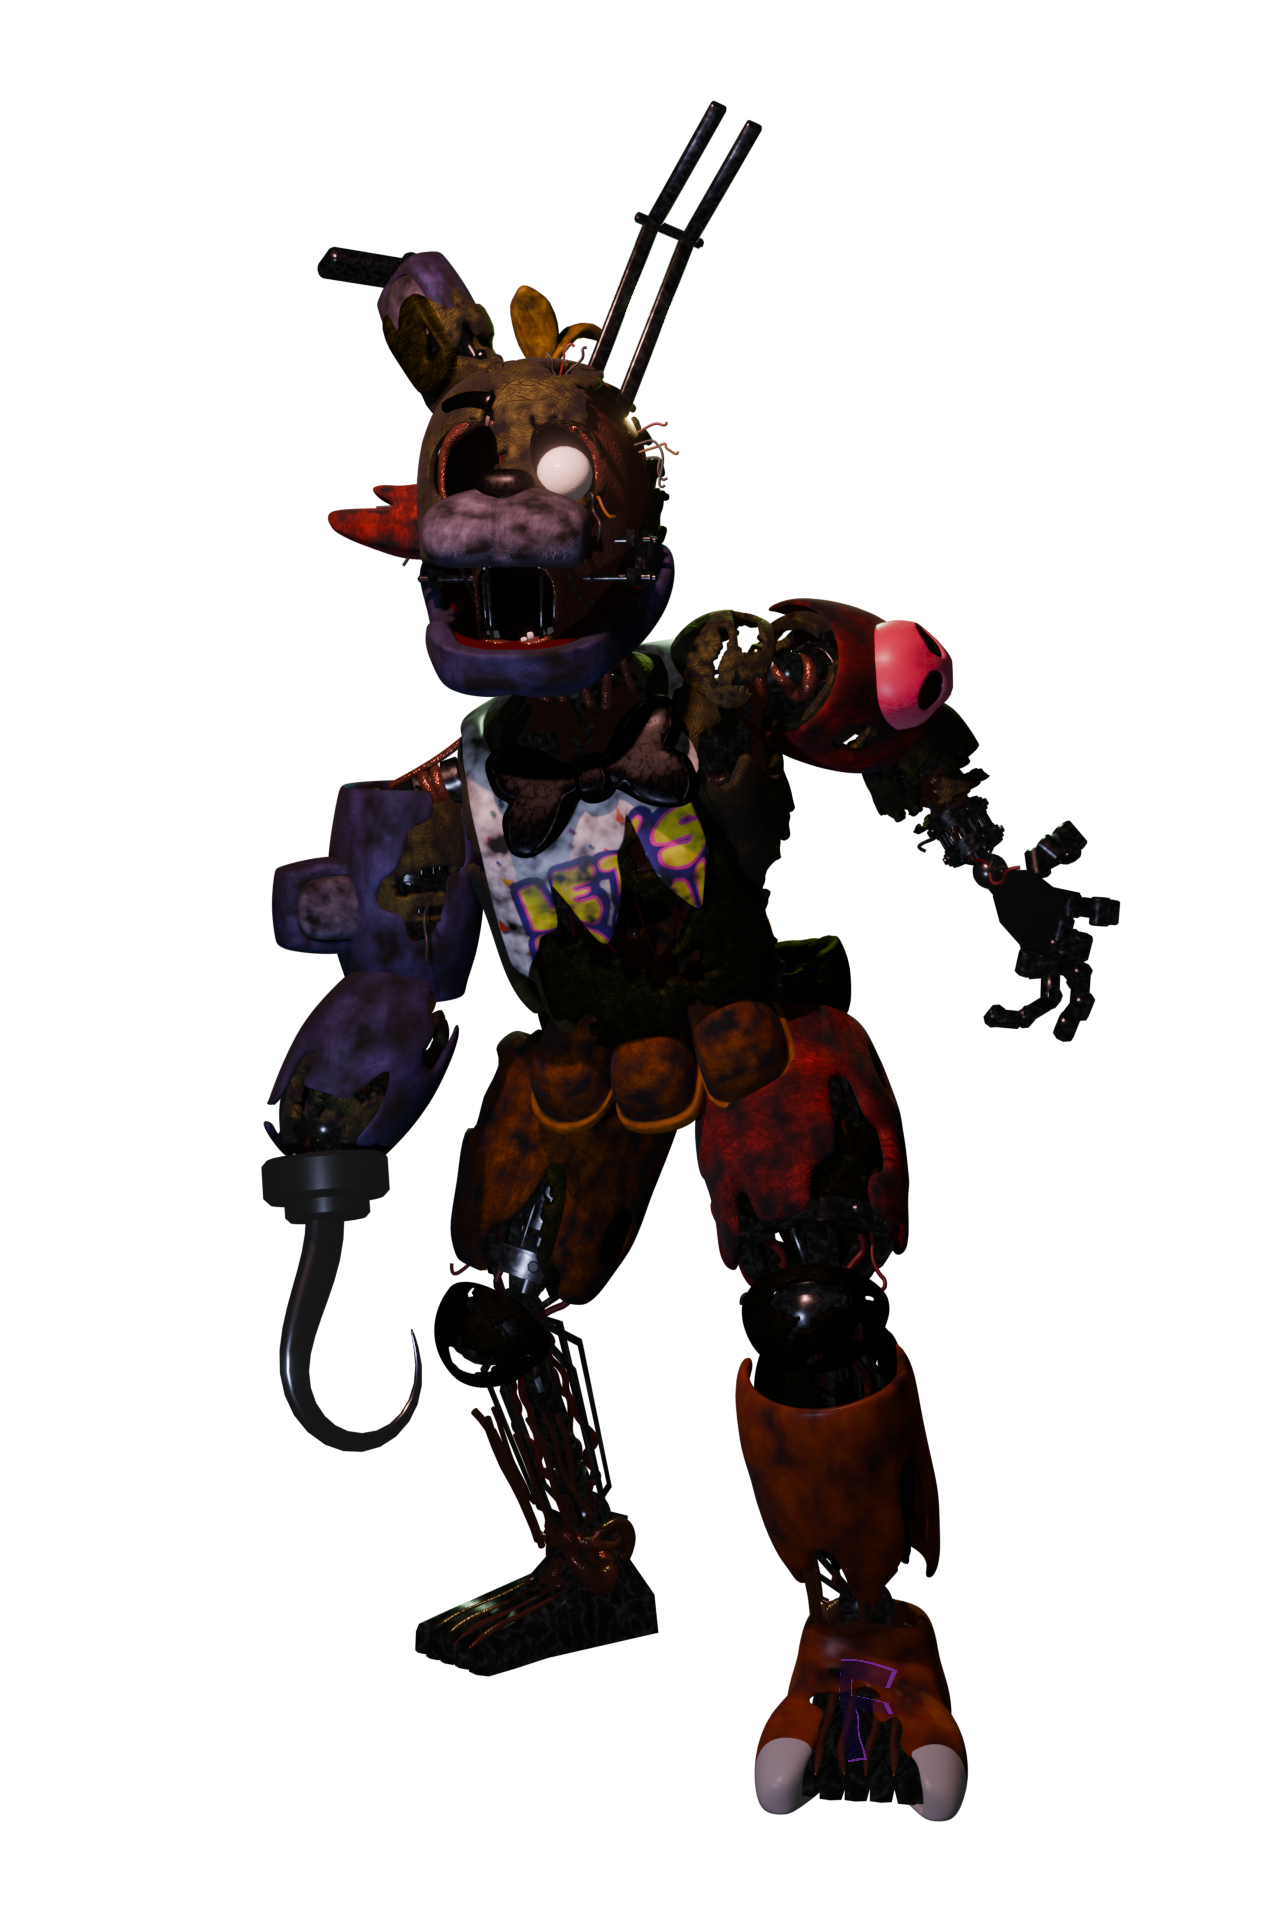 withered foxy rare screen full body by Fnaf3Dart on DeviantArt